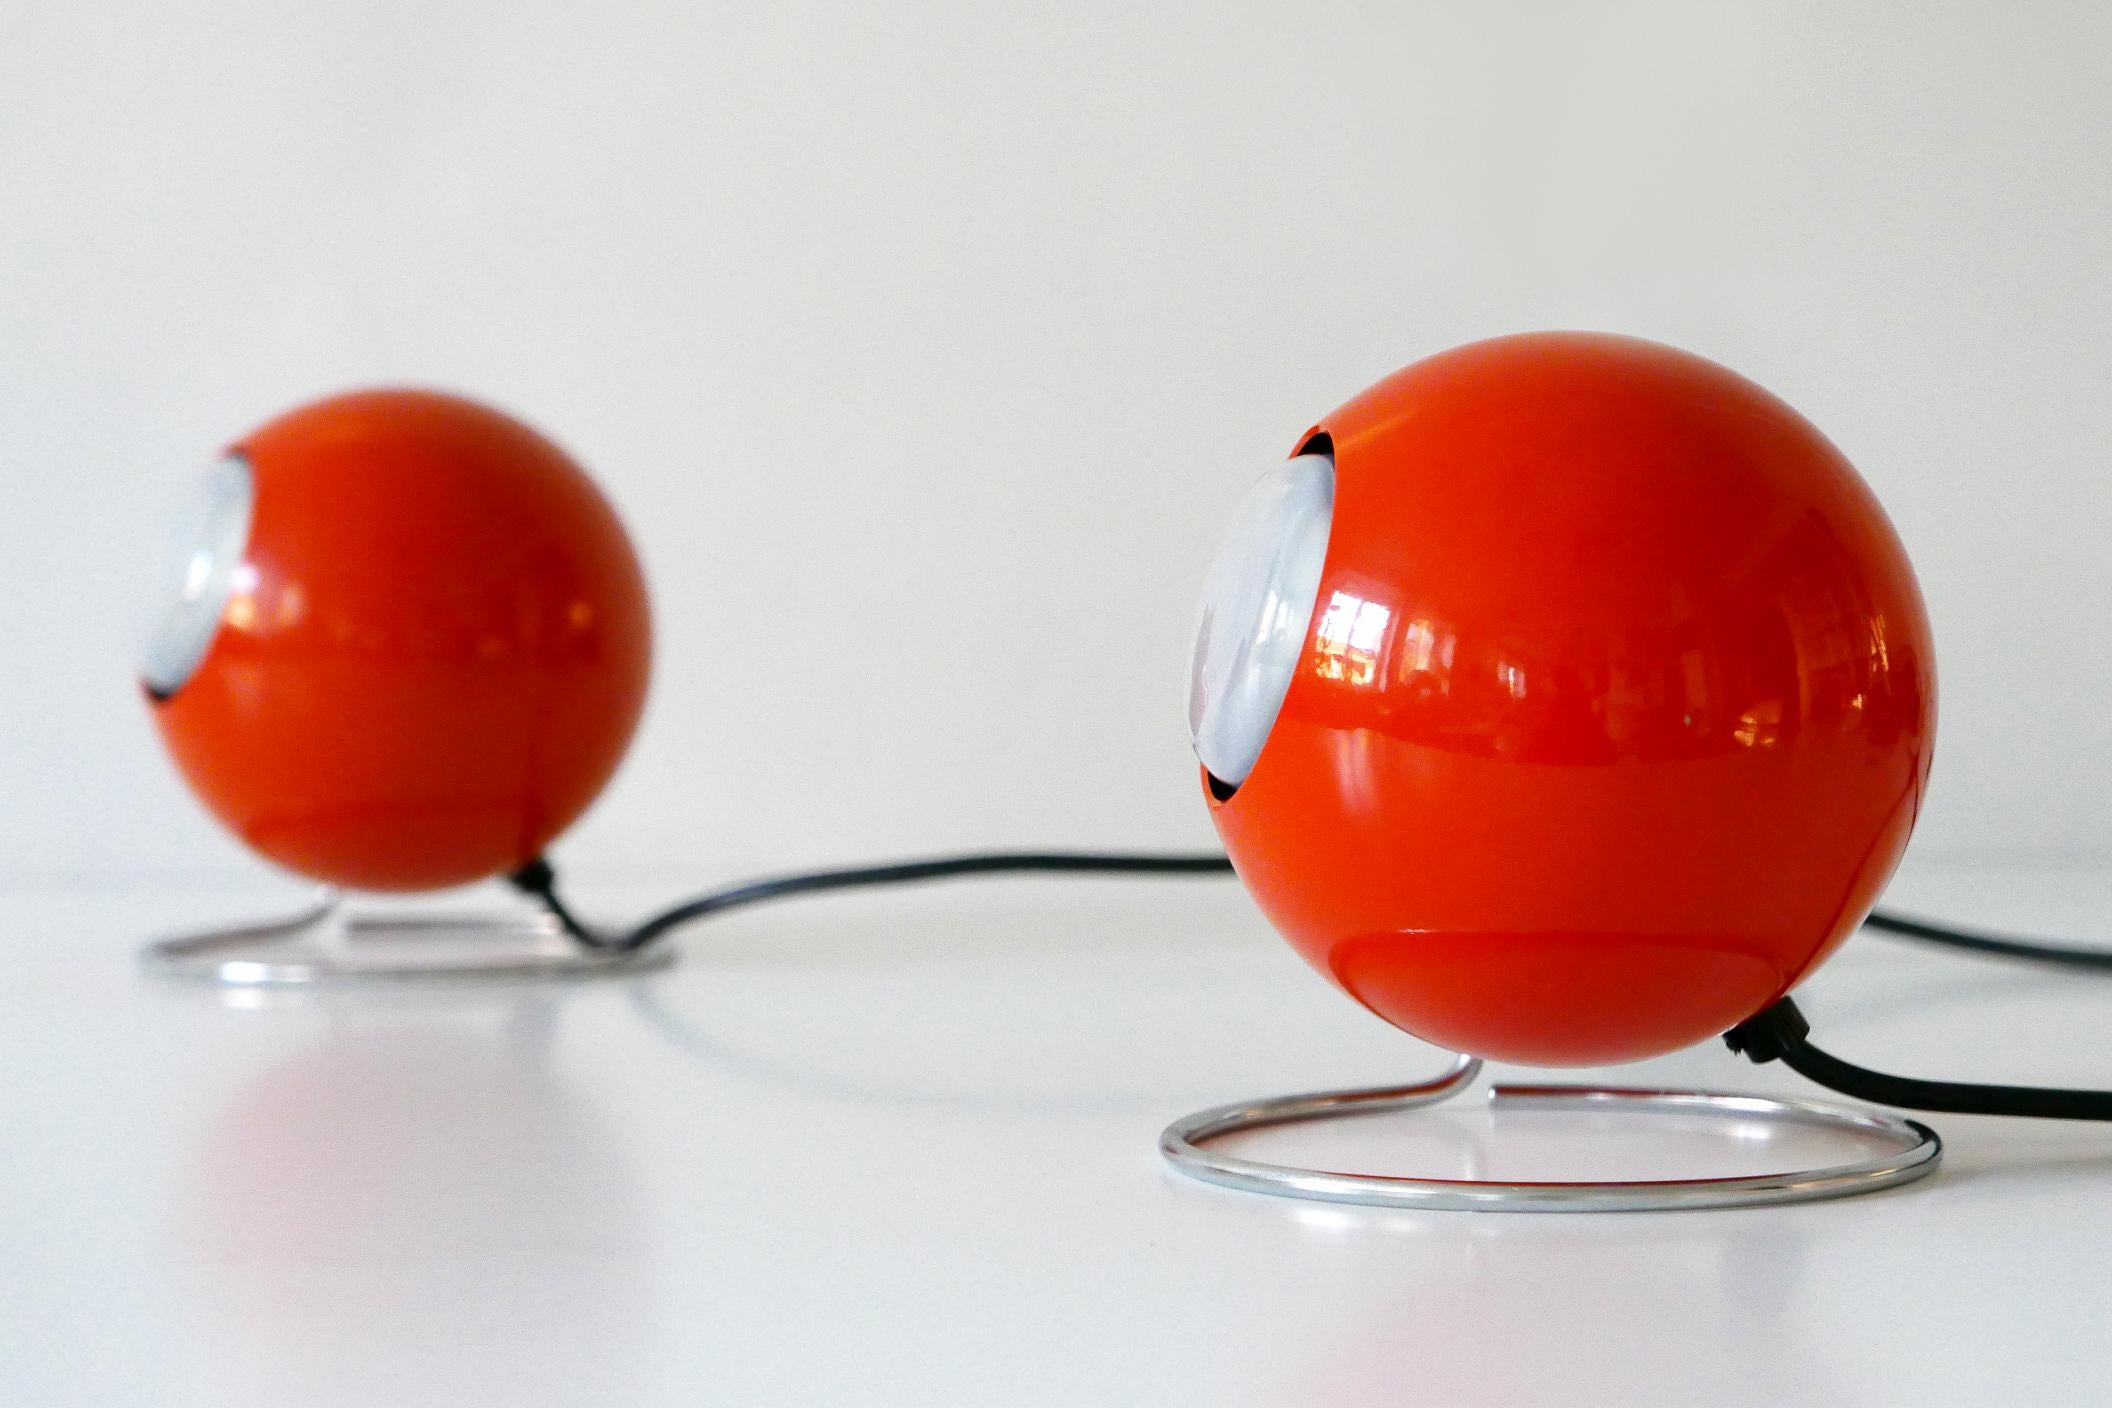 Set of Two Mid-Century Modern Metal 'Eye' Table Lamps, ERCO, 1960s-1970s Germany For Sale 8